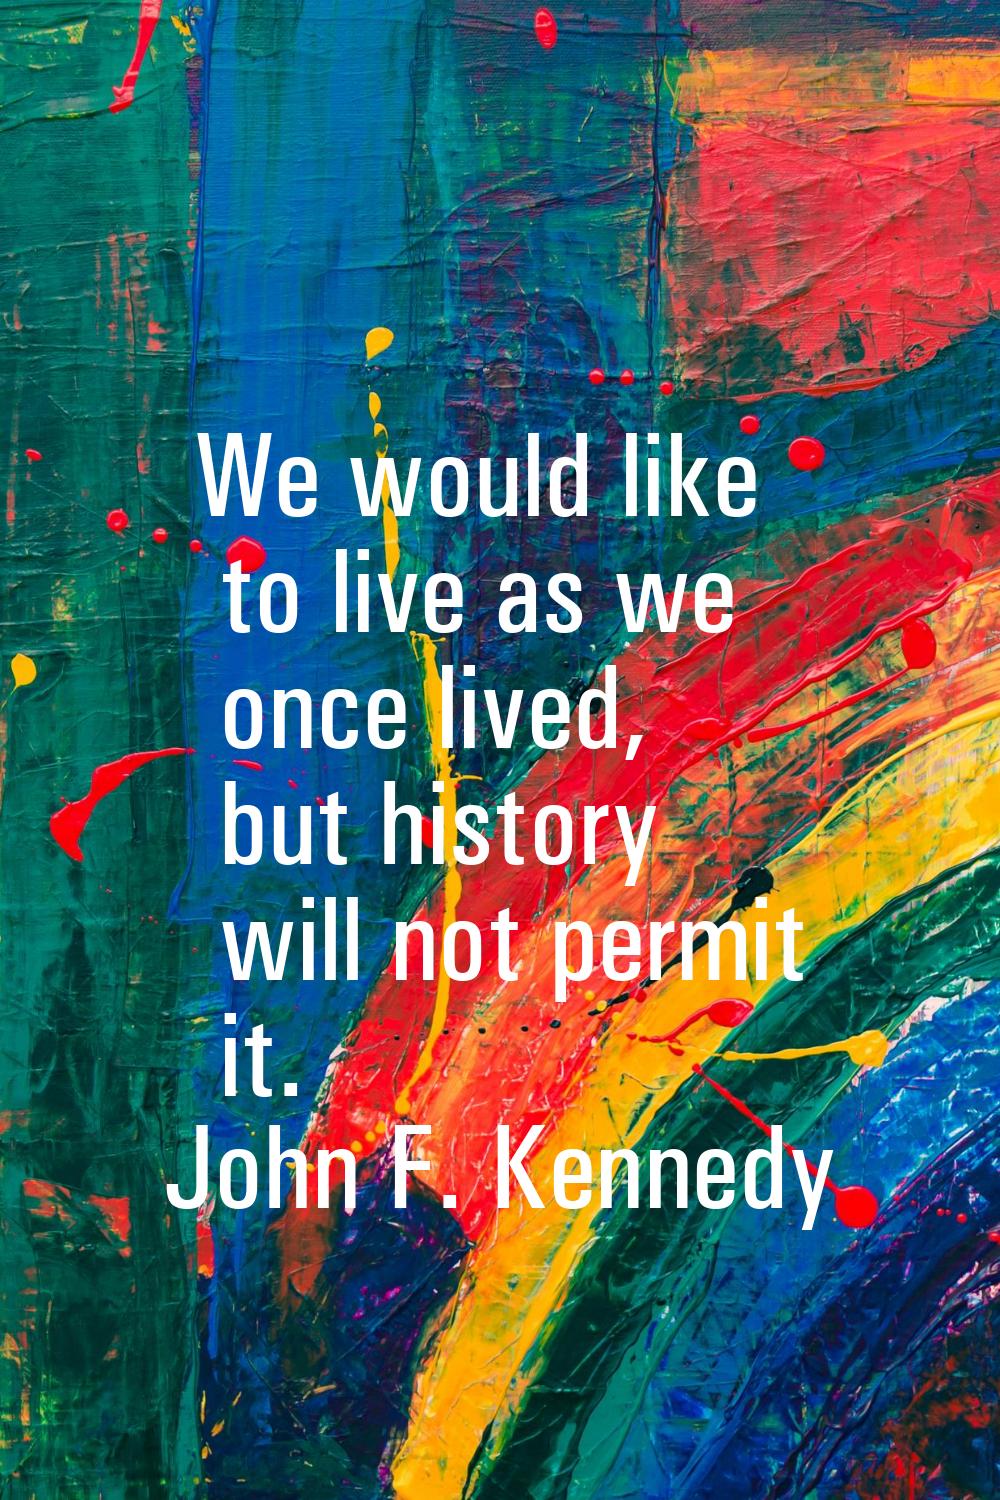 We would like to live as we once lived, but history will not permit it.